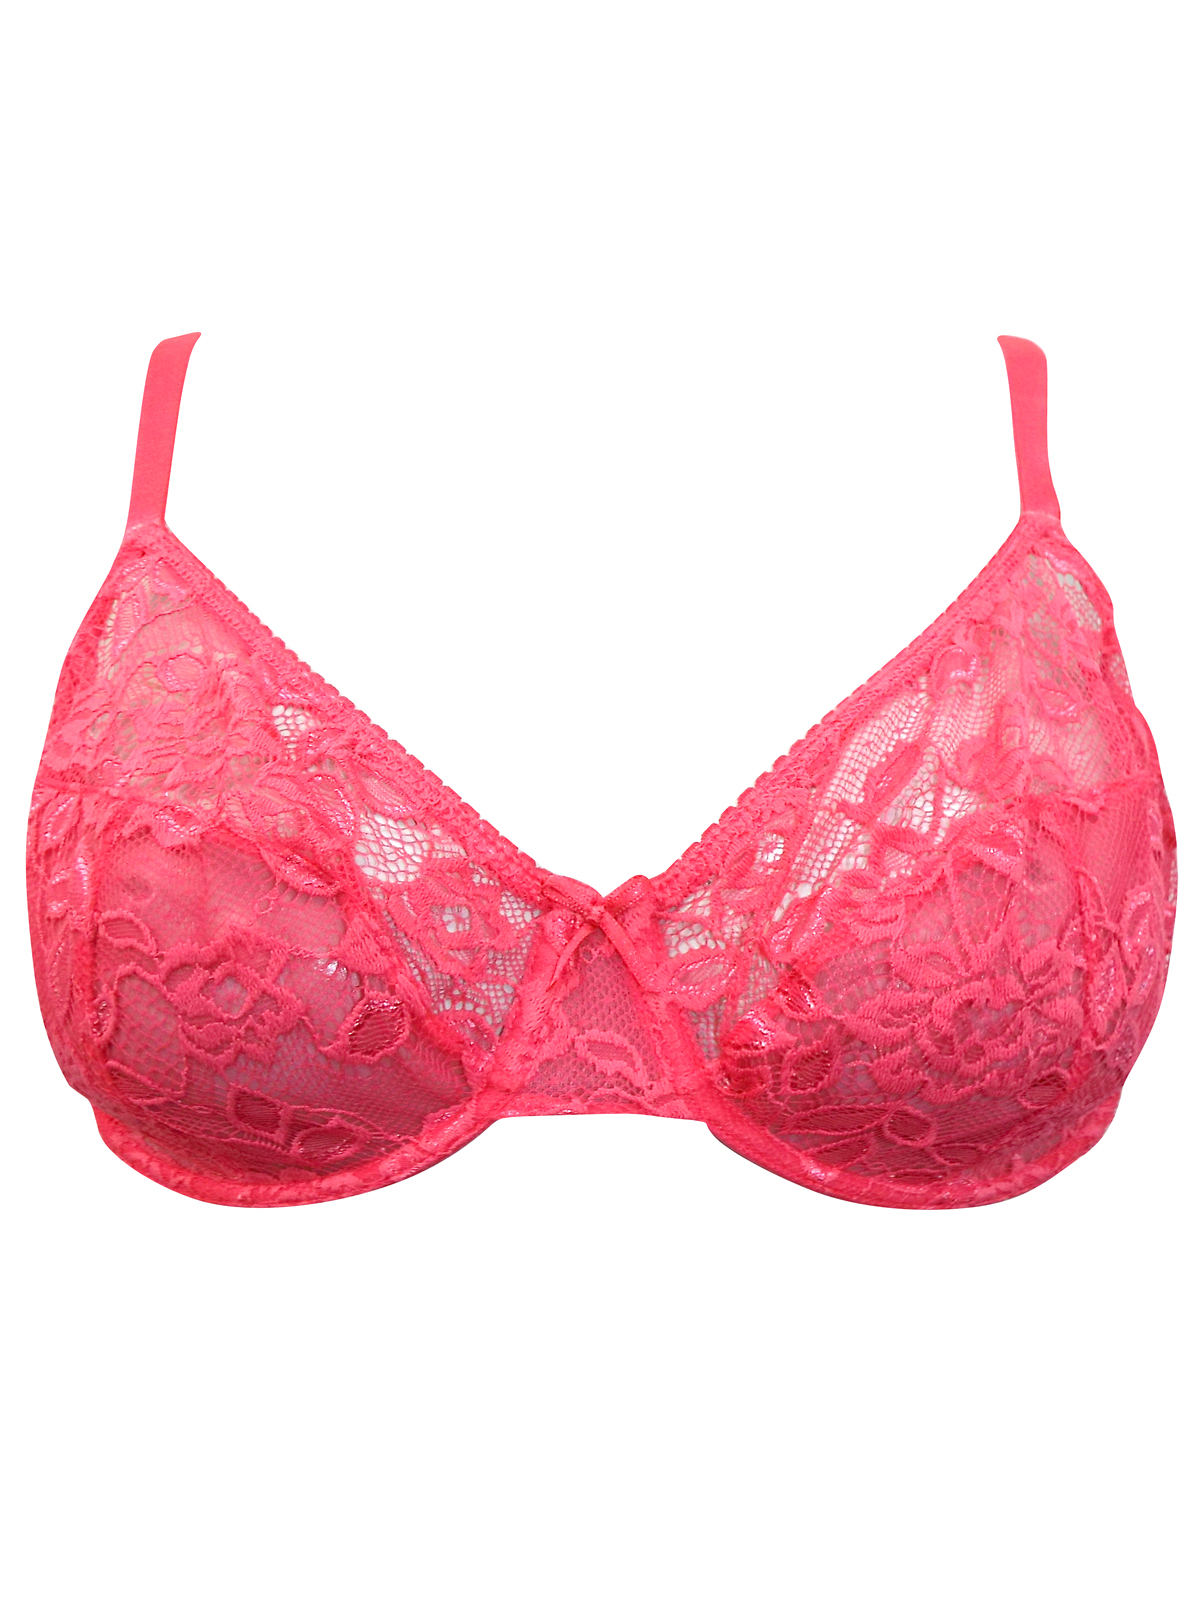 Marks And Spencer Mand5 Pink All Over Lace Underwired Full Cup Bras Size 32 To 42 B C D Dd